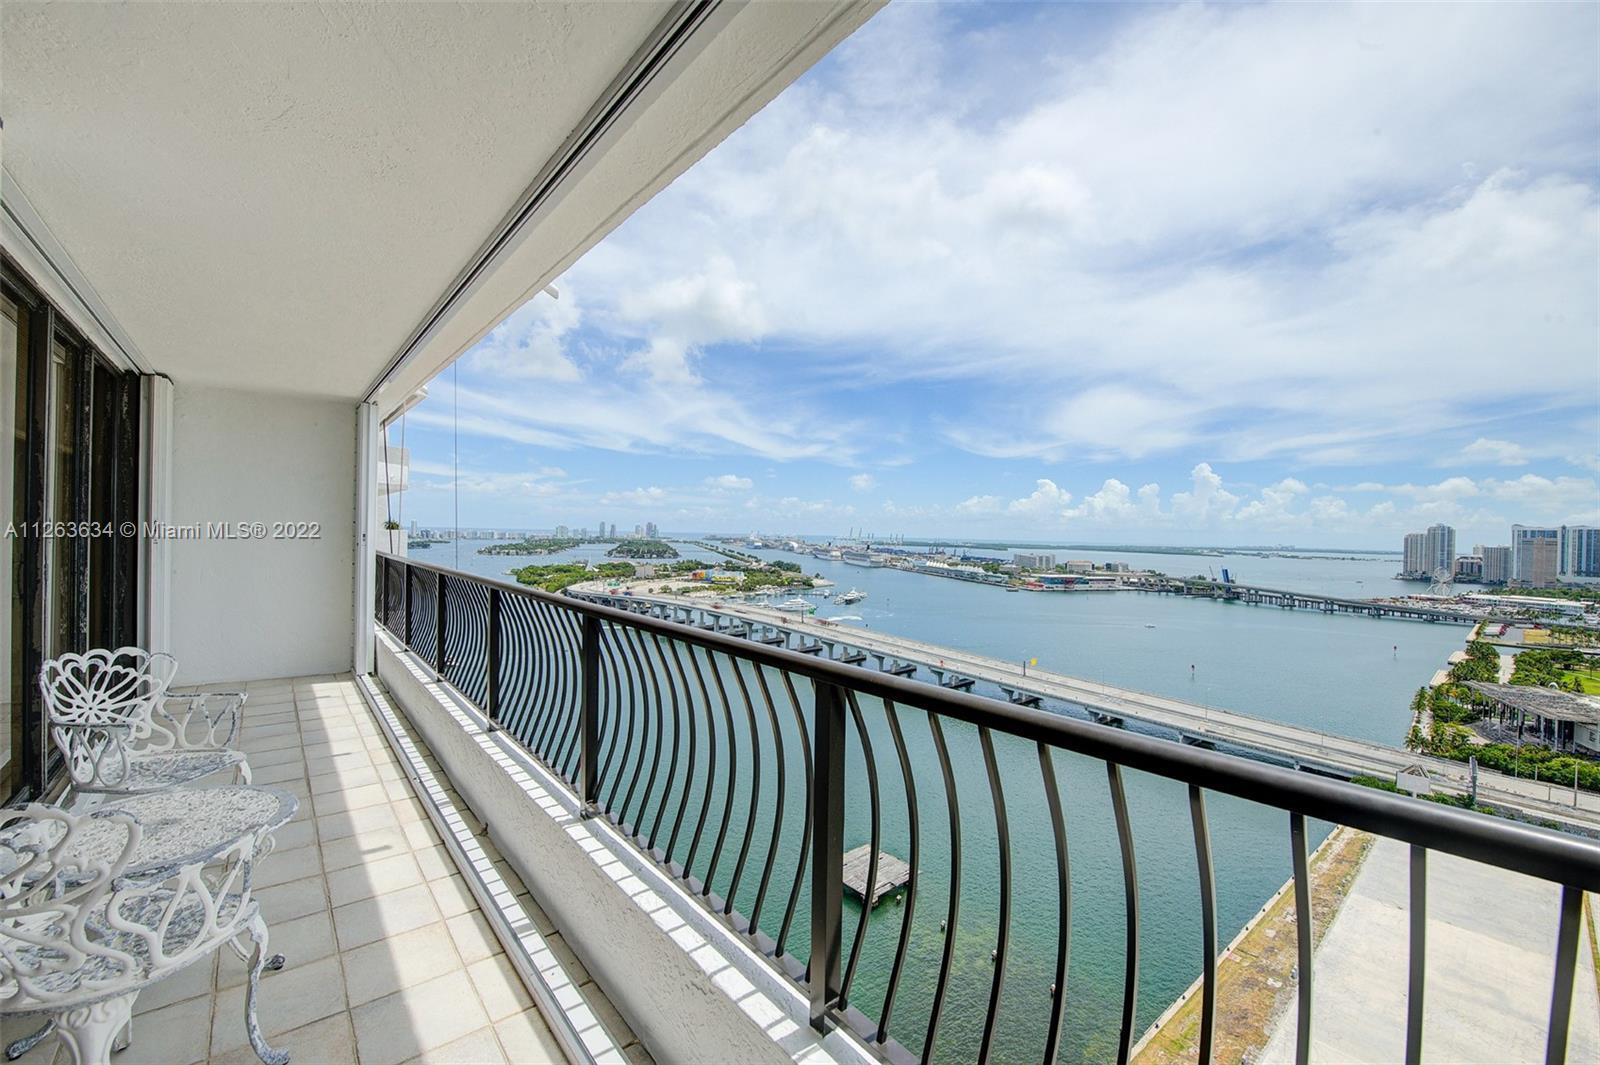 CORNER PENTHOUSE w/ SPECTACULAR VIEWS all the way to the OCEAN, BISCAYNE BAY, DODGE ISLAND HARBOR wh